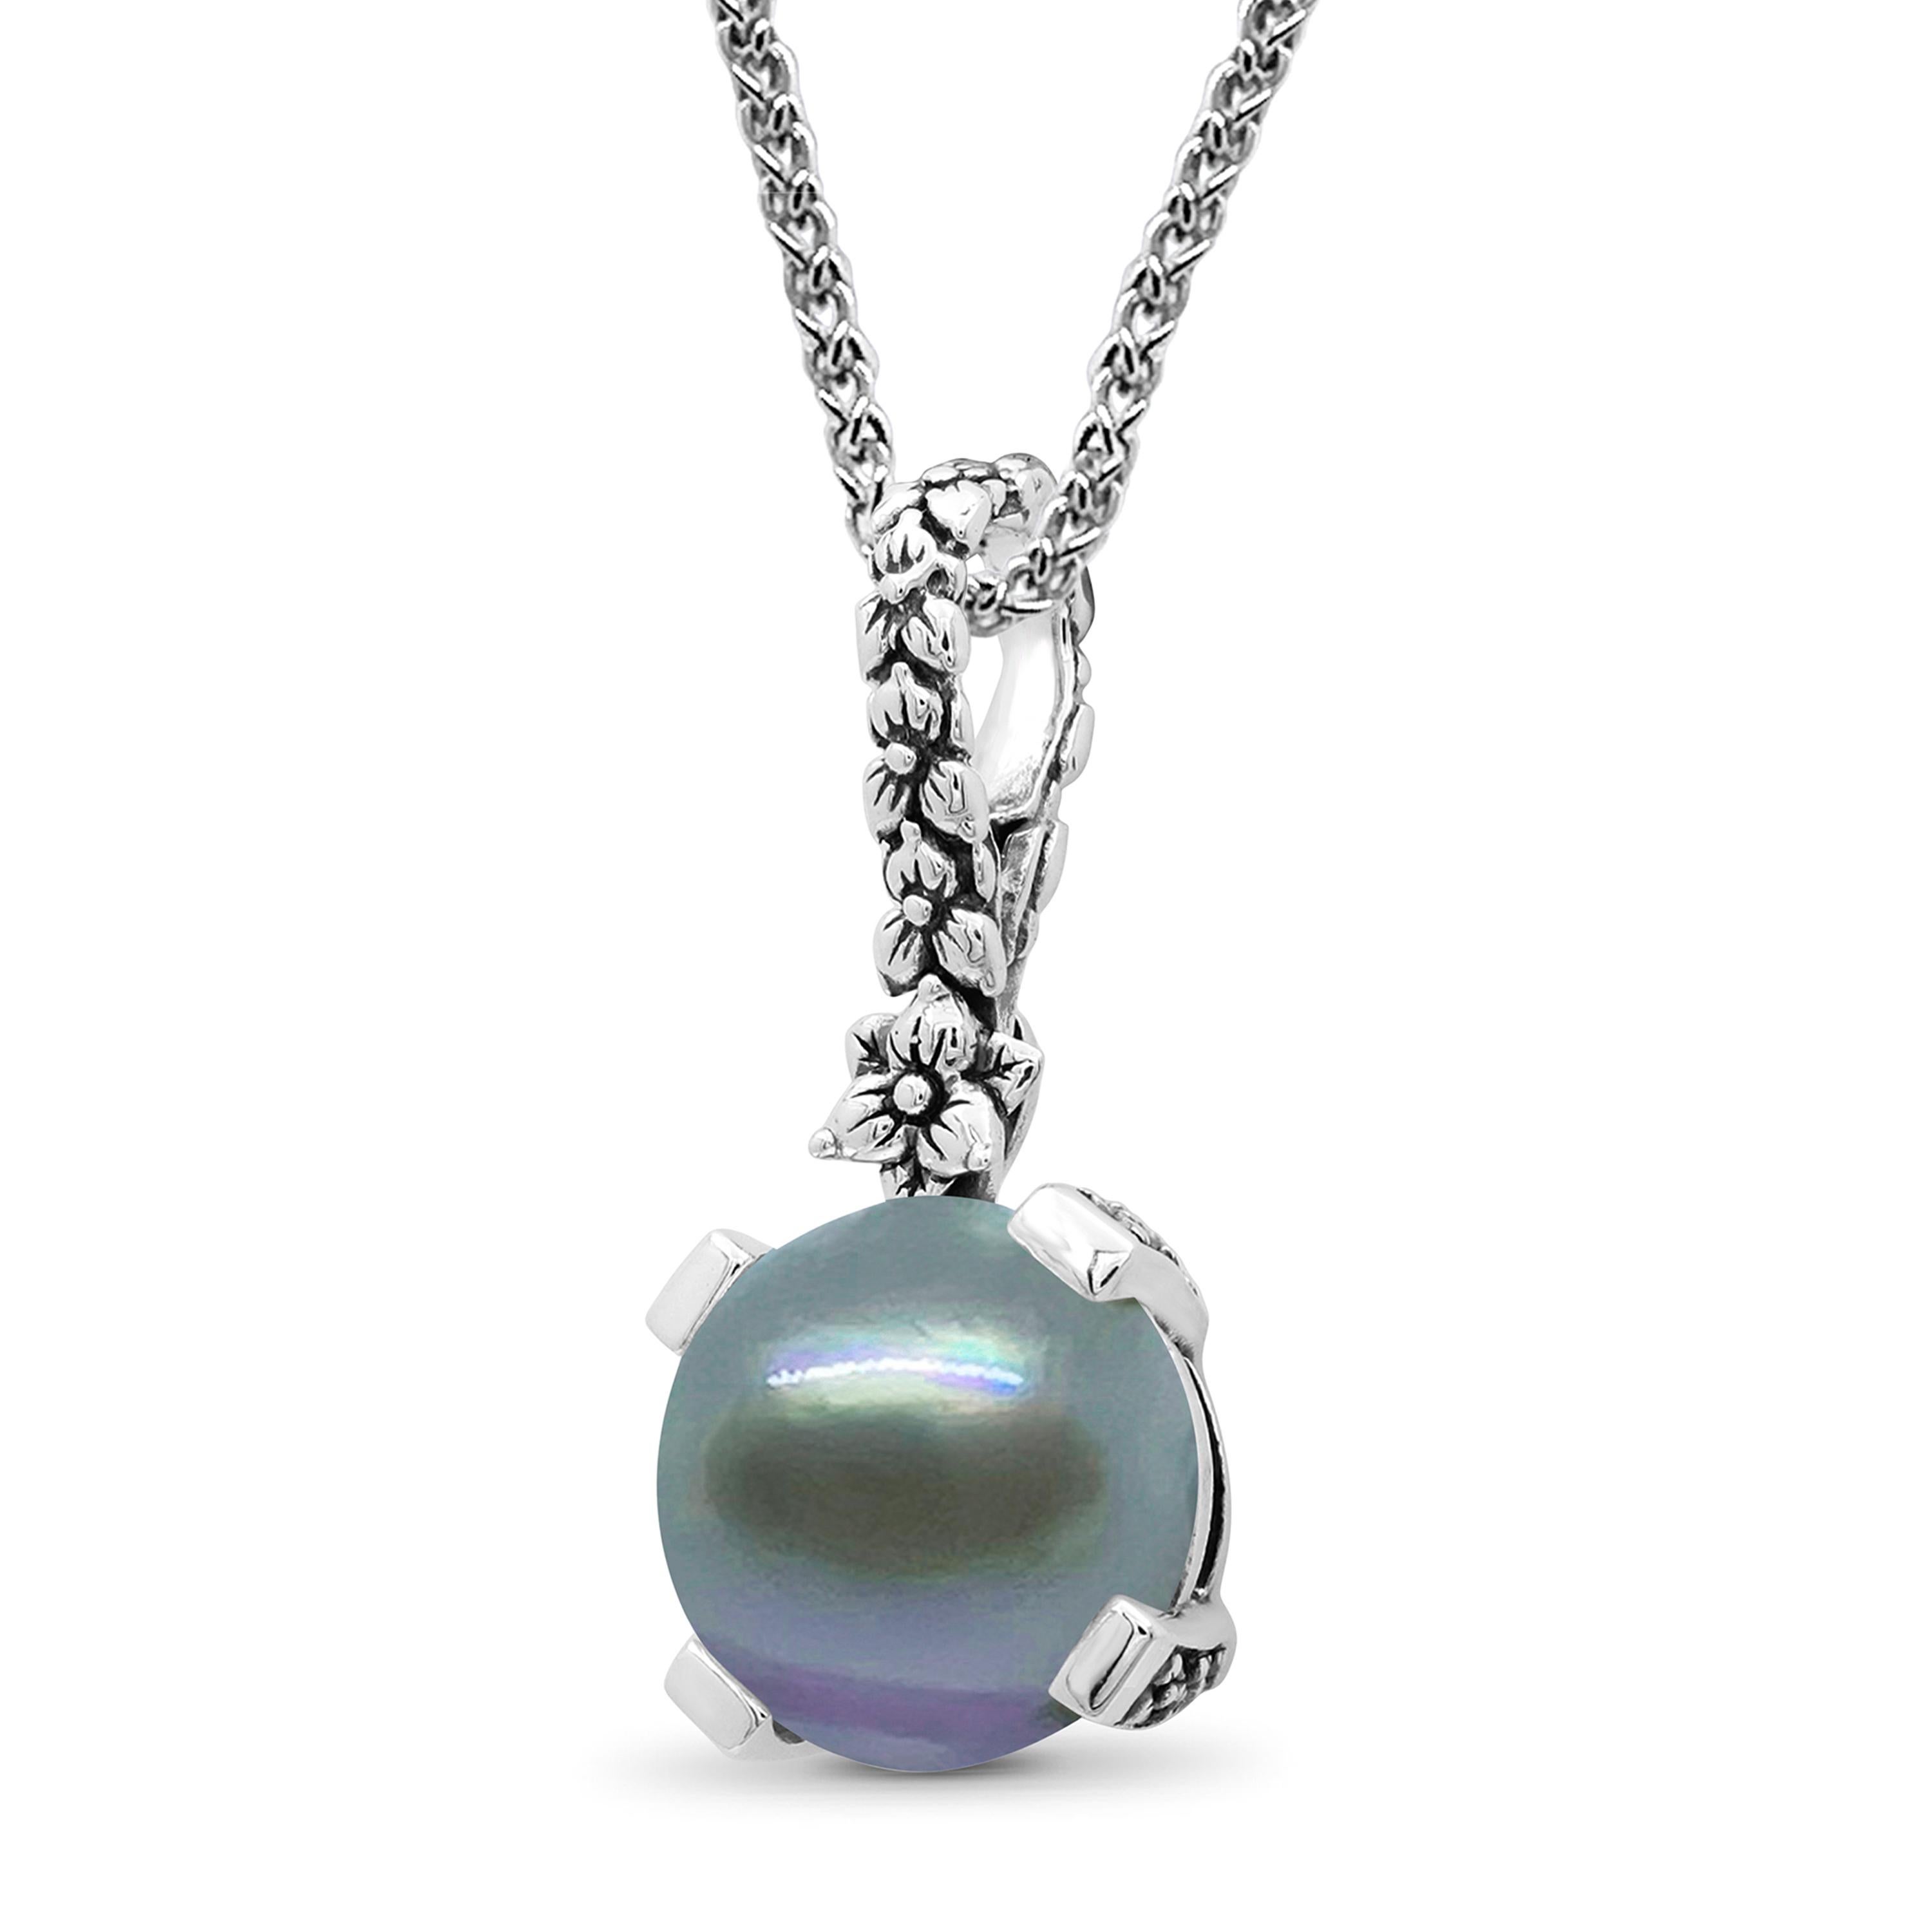 This finely detailed Stephen Dweck Sterling Silver Pendant Necklace features a 14mm sea blue pearl in a hand carved floral setting on a silver chain with a toggle clasp. The Decoration Size is 14mm. The Length is 18'' inches. The Weight is 14.2g.